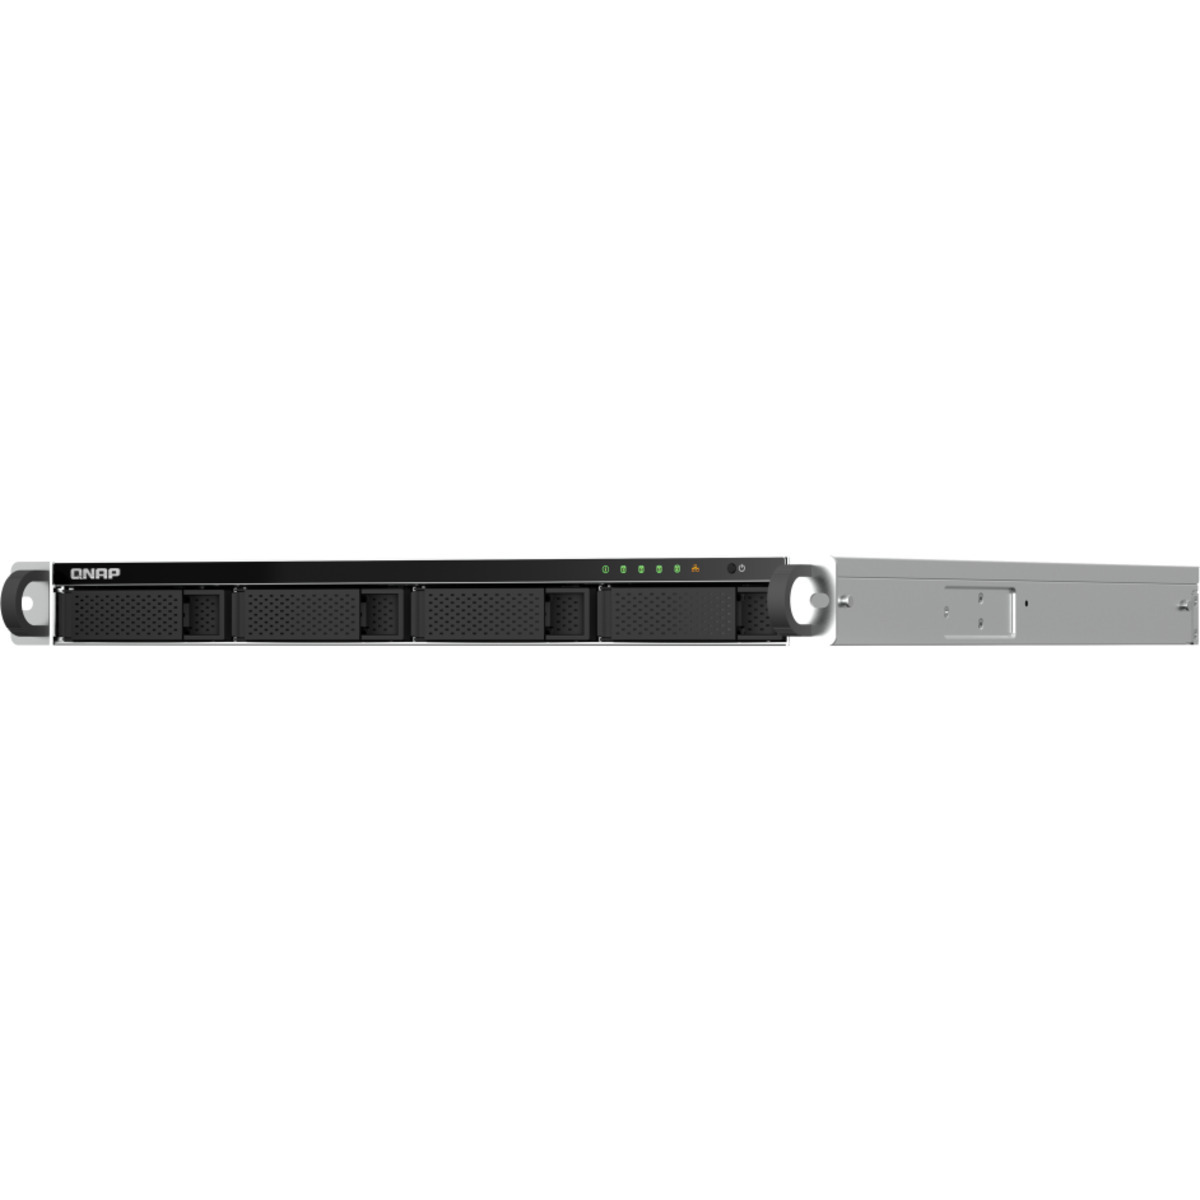 buy $2603 QNAP TS-464U-RP 24tb RackMount NAS - Network Attached Storage Device 4x6000gb Seagate IronWolf Pro ST6000NT001 3.5 7200rpm SATA 6Gb/s HDD NAS Class Drives Installed - Burn-In Tested - nas headquarters buy network attached storage server device das new raid-5 free shipping simply usa TS-464U-RP